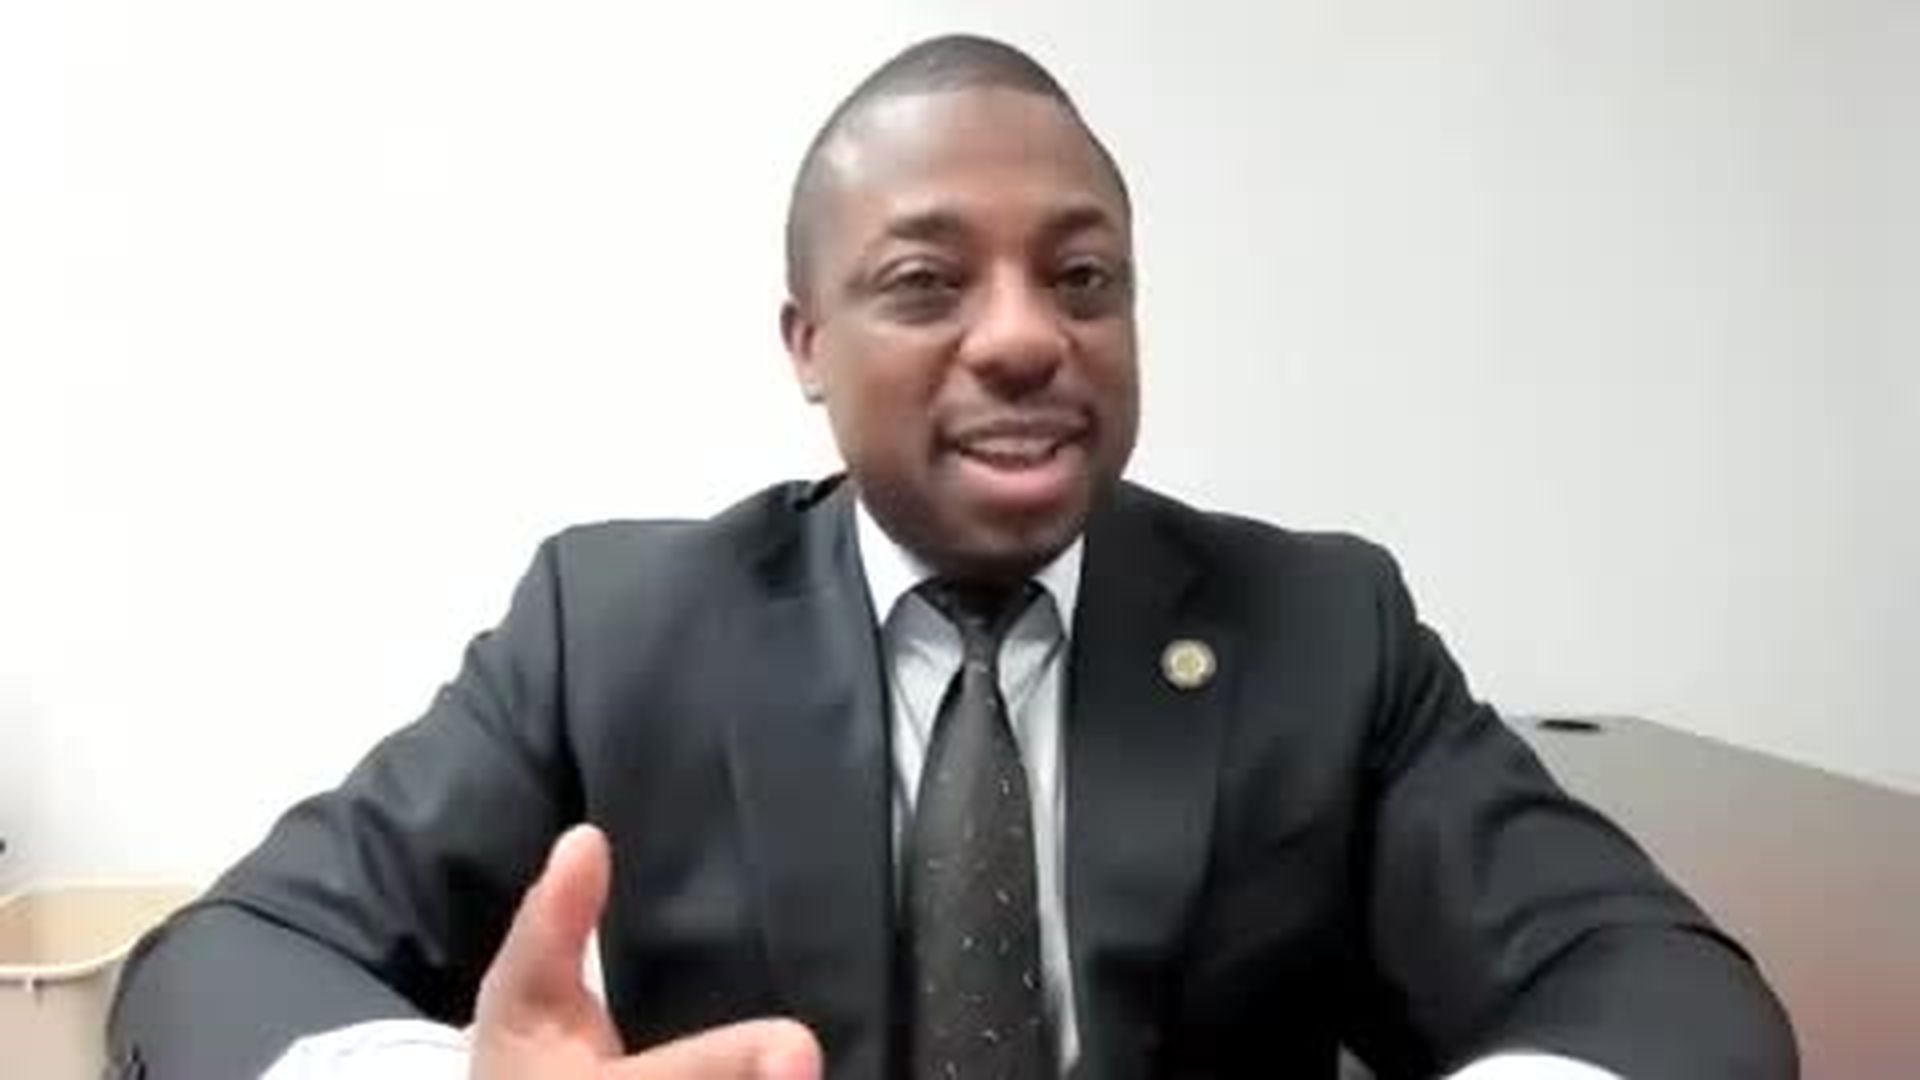 Brian Benjamin | Democratic Candidate for Comptroller of the City of New York